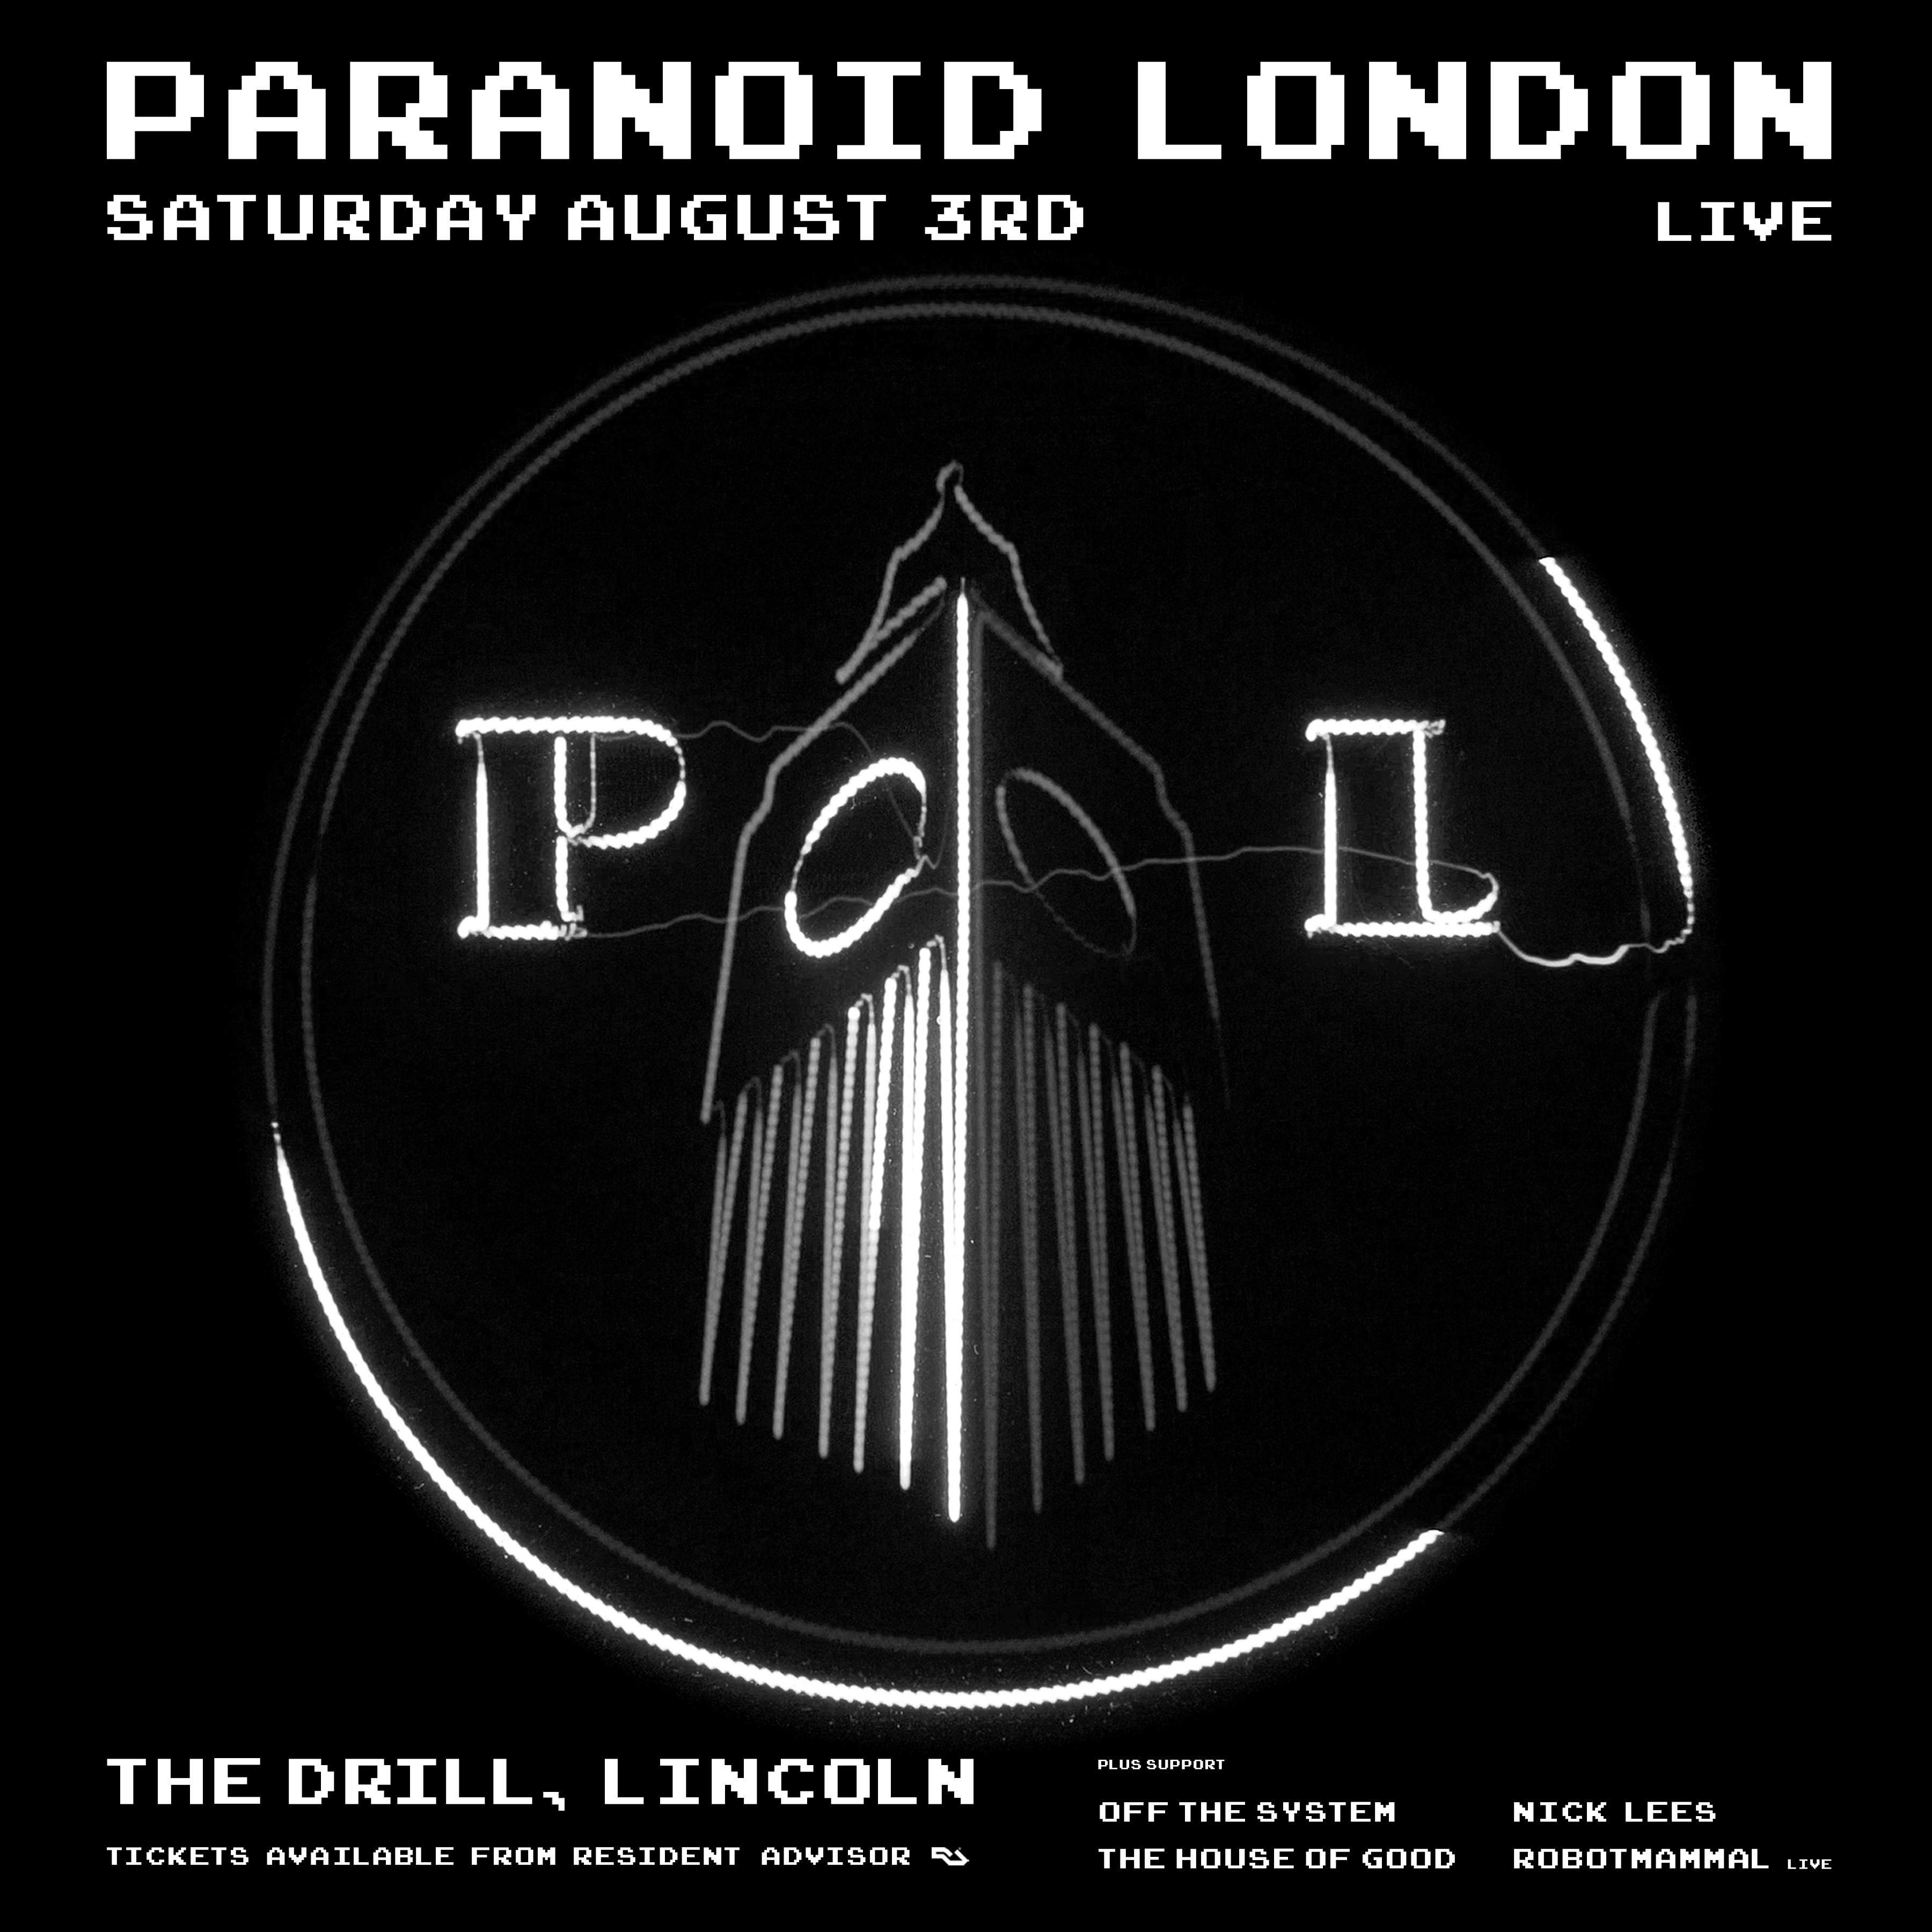 Off The System presents: Paranoid London - Página frontal